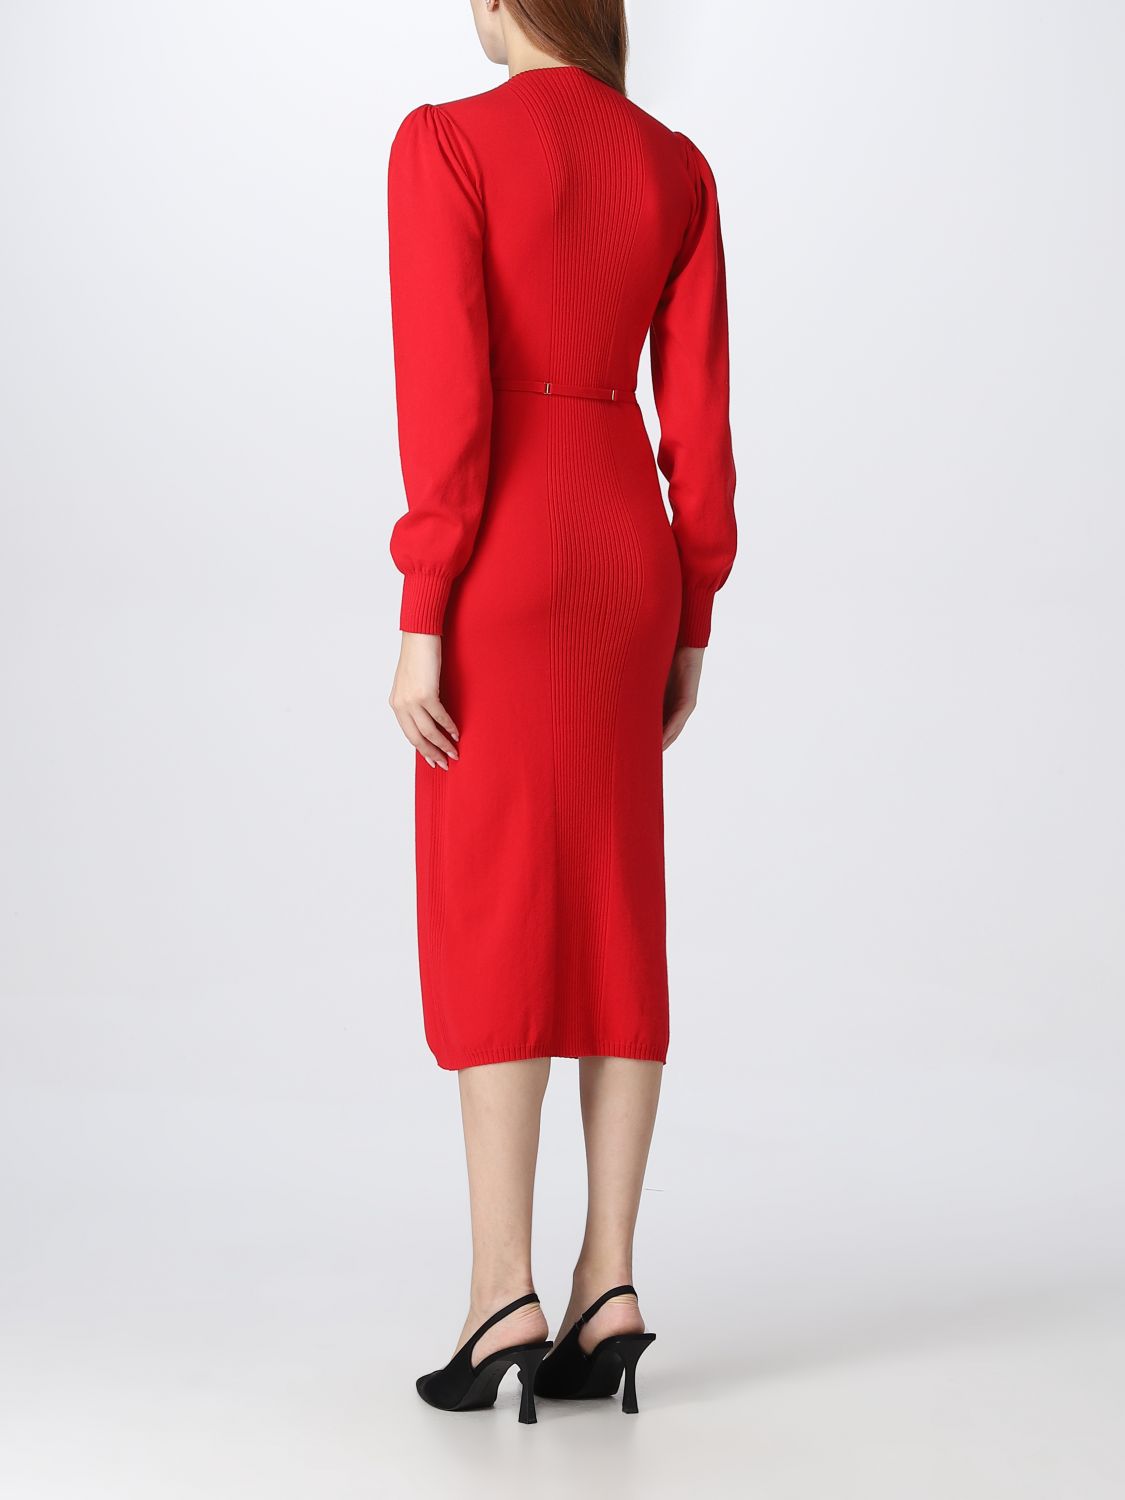 Twinset Outlet: dress for woman - Red | Twinset dress 222TT3192 online ...